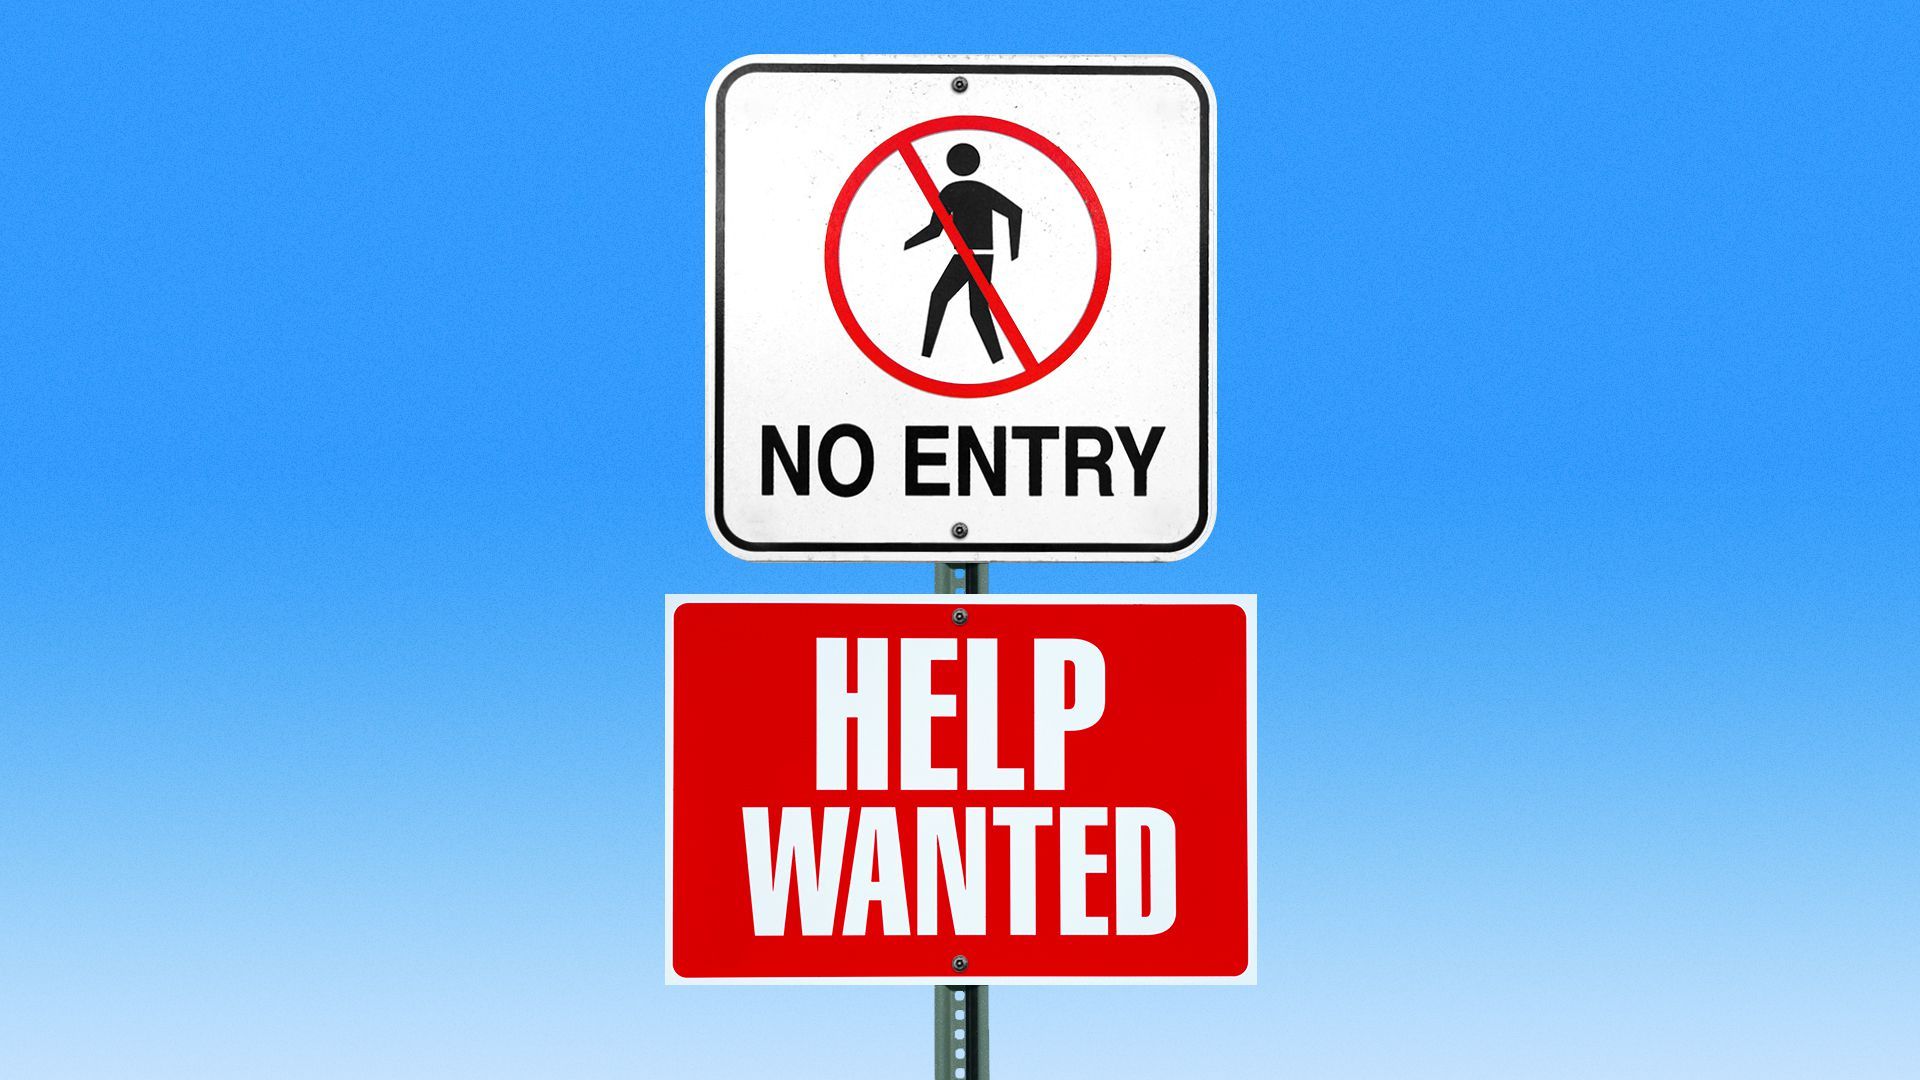 Illustration of two signs on a post, one reading "NO ENTRY" and the second reading "HELP WANTED"